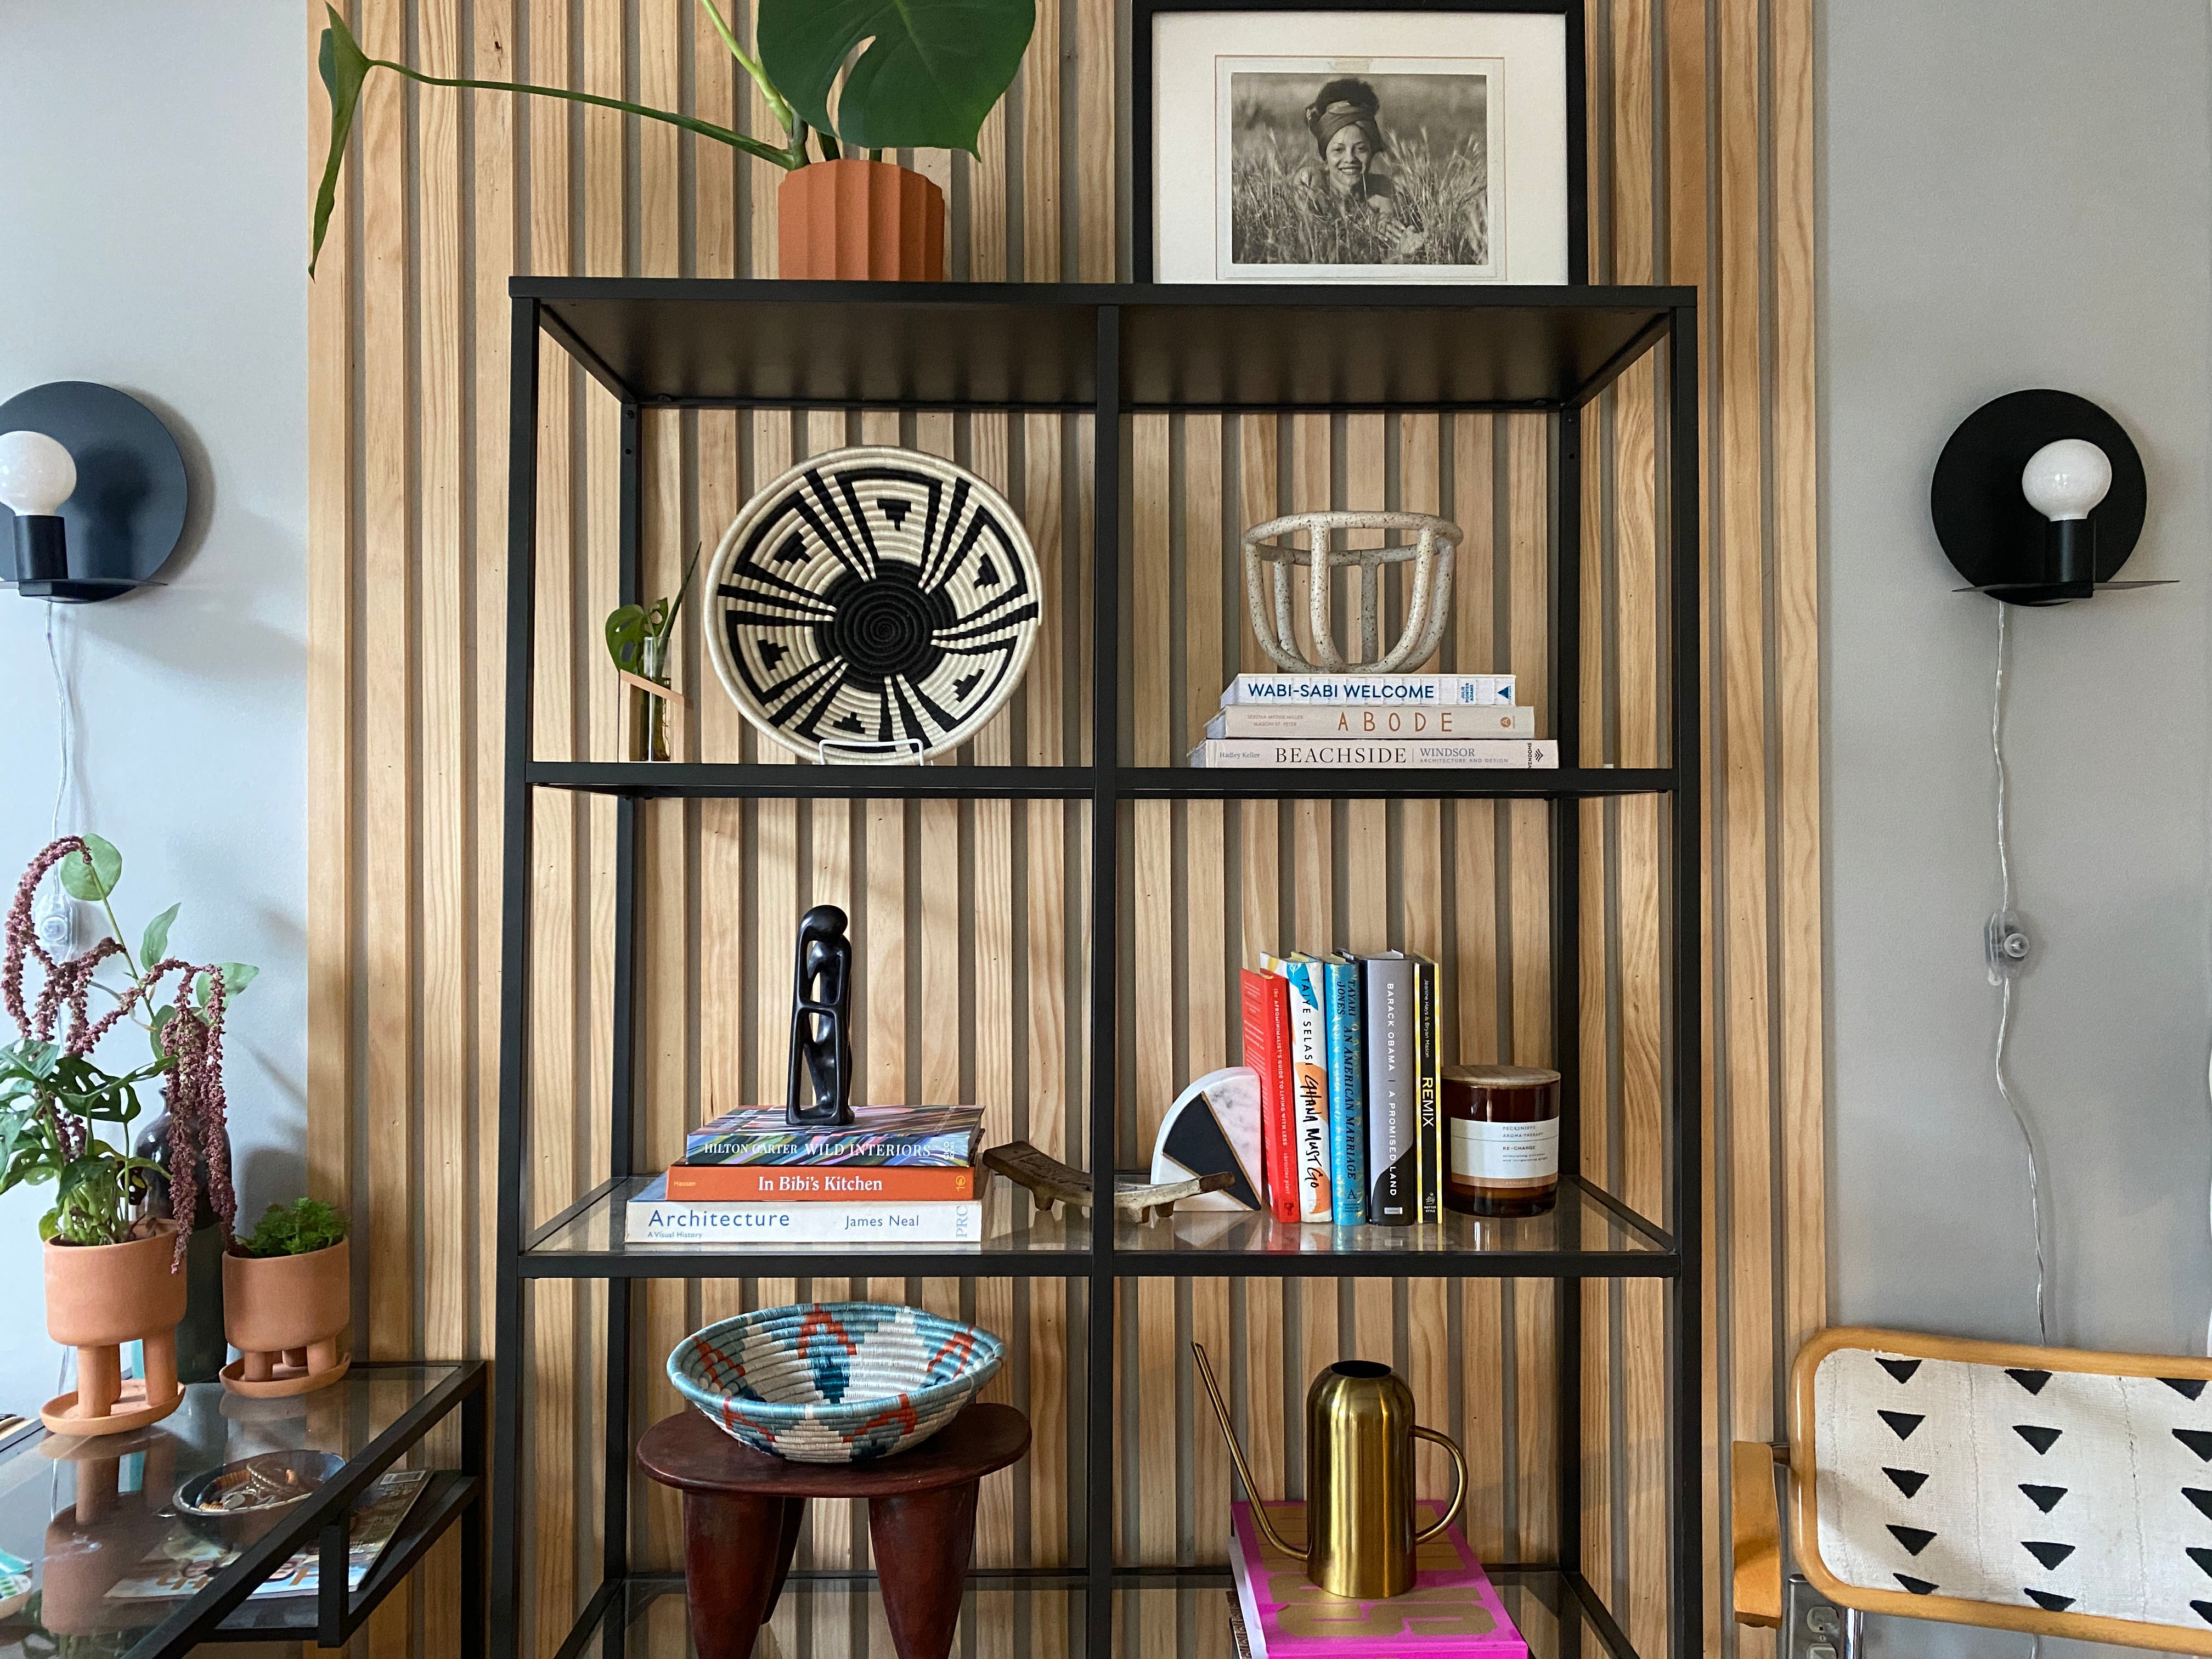 Africa Home decor modern of bookshelf styling with traditional decorative accents